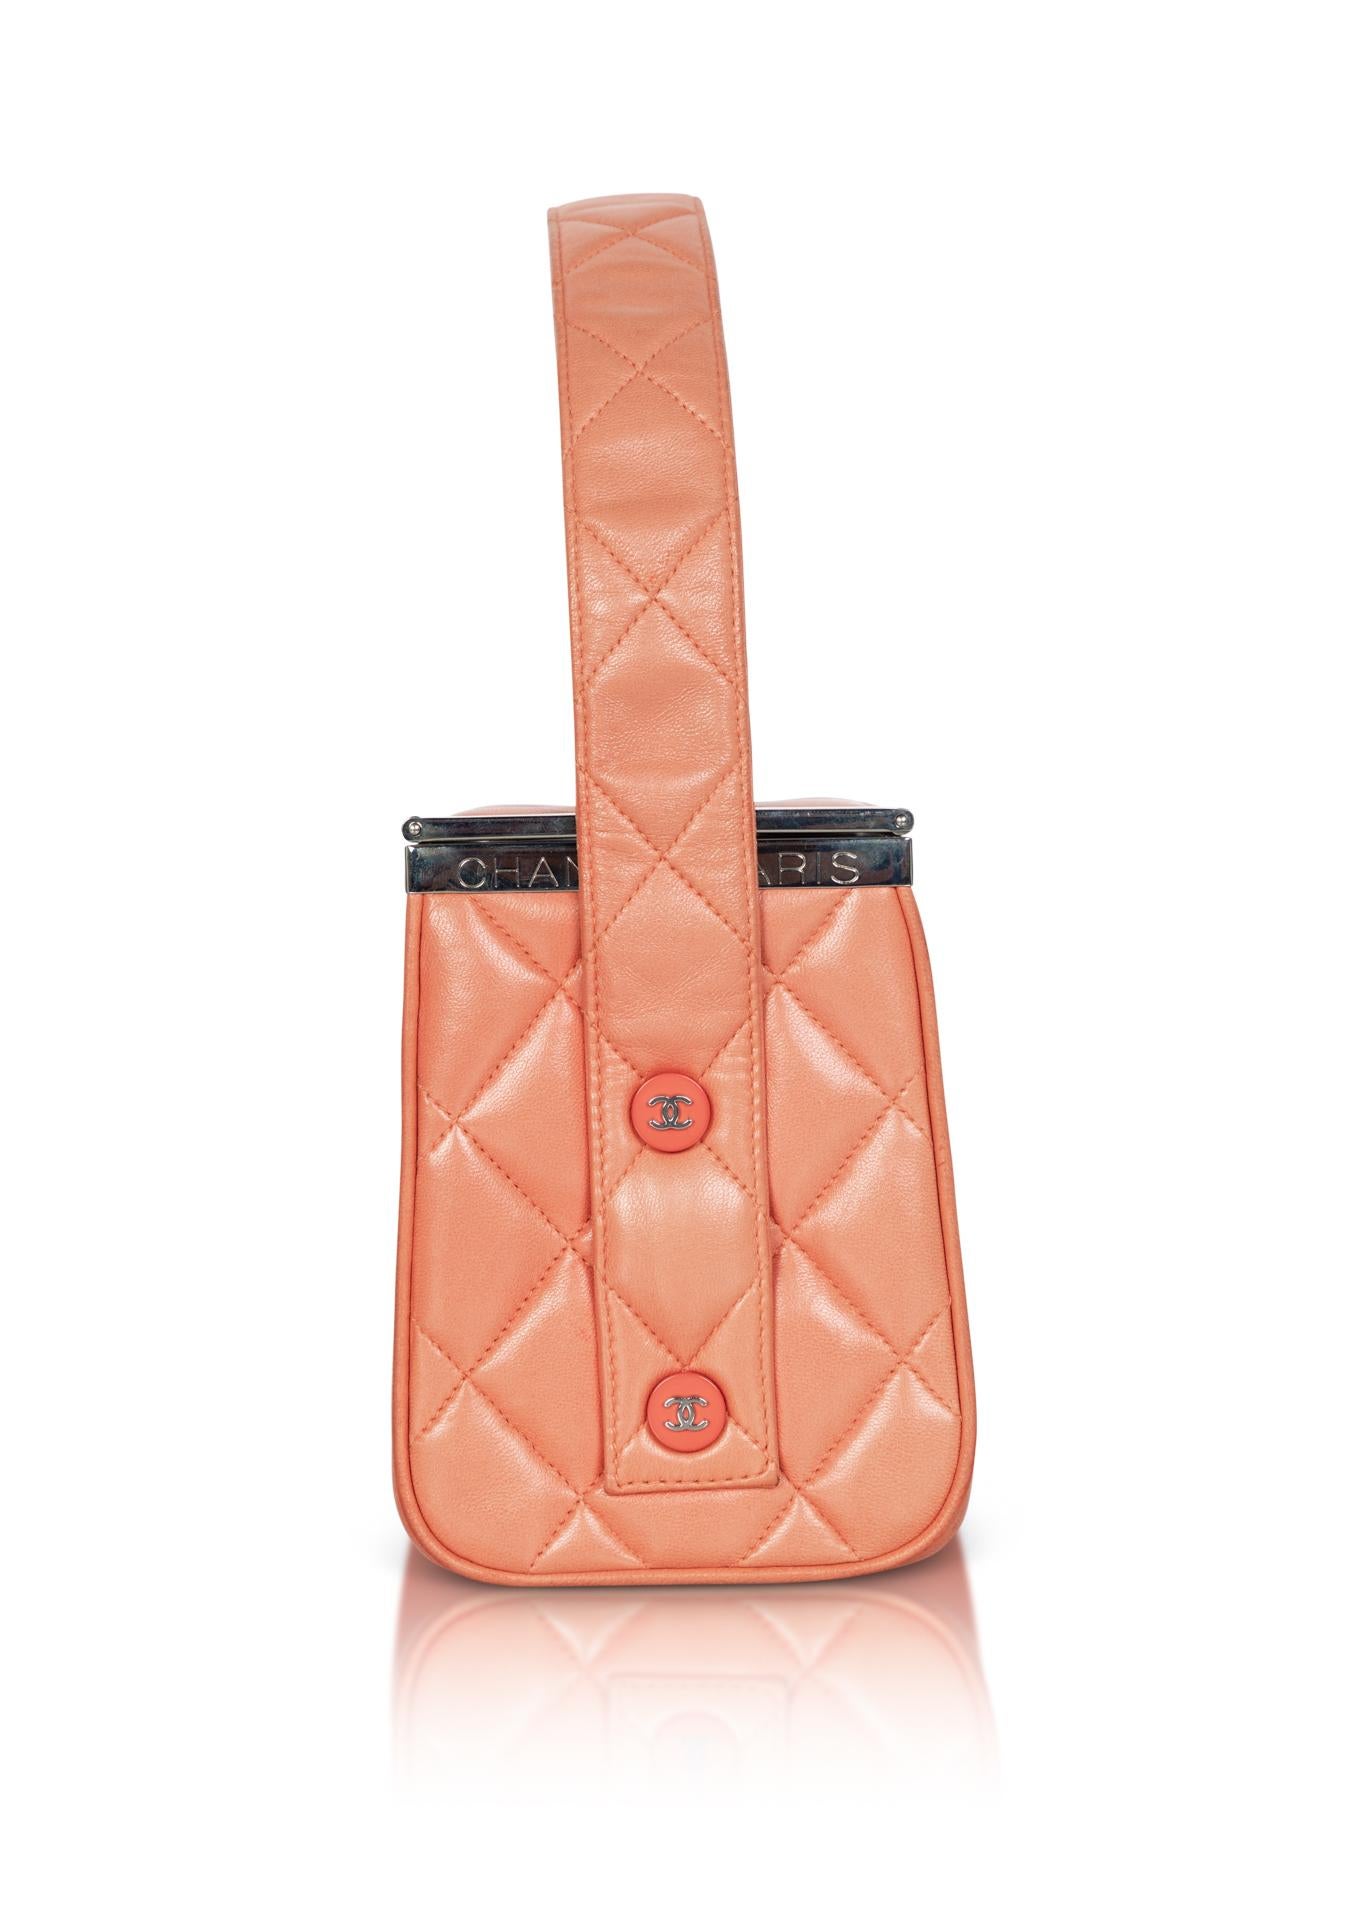 Chanel Lambskin Quilted Box Bag Orange, 1990s 2